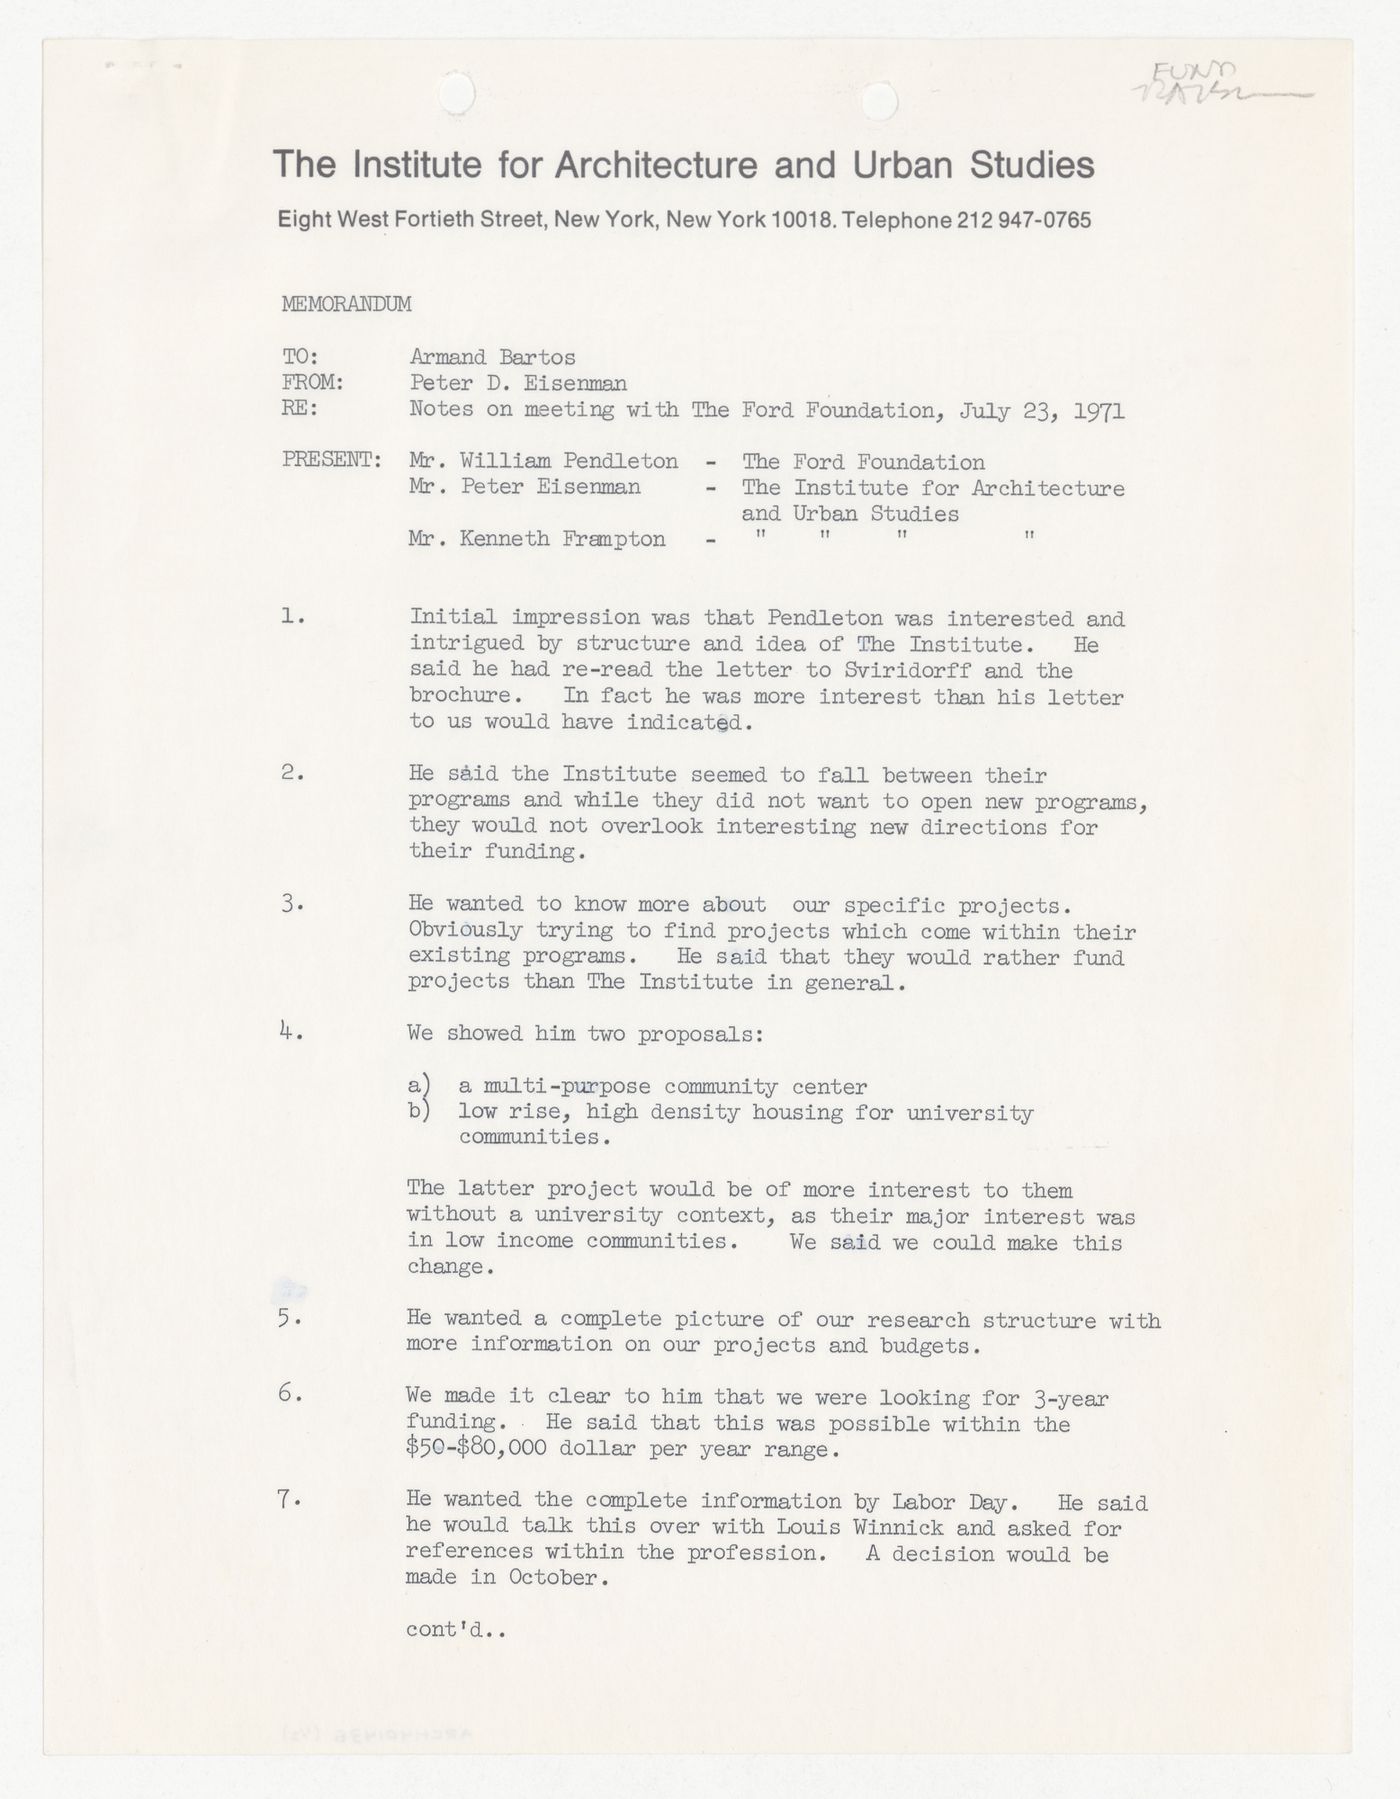 Memorandum from Peter D. Eisenman to Armand Bartos about meeting with The Ford Foundation on July 23rd, 1971